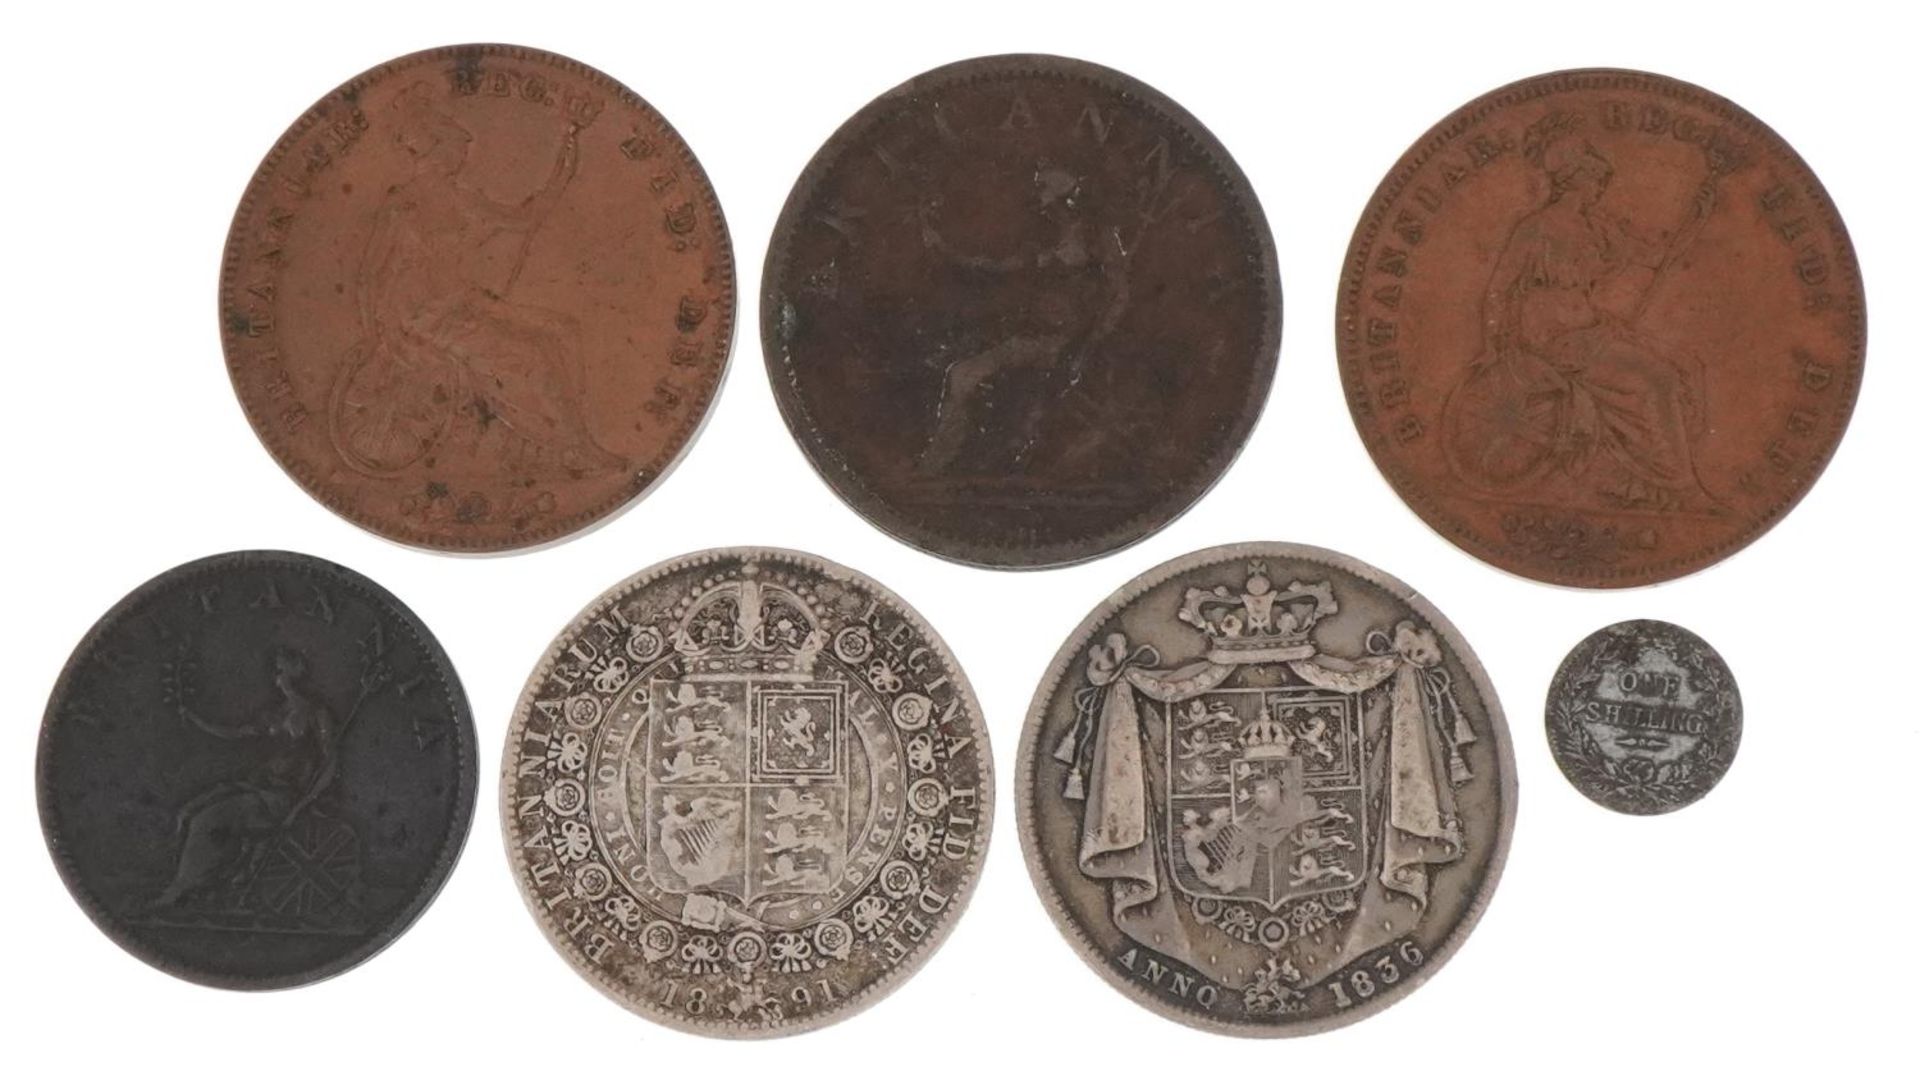 George III and later British coinage comprising 1806 penny, 1807 half penny, 1836 half crown, 1891